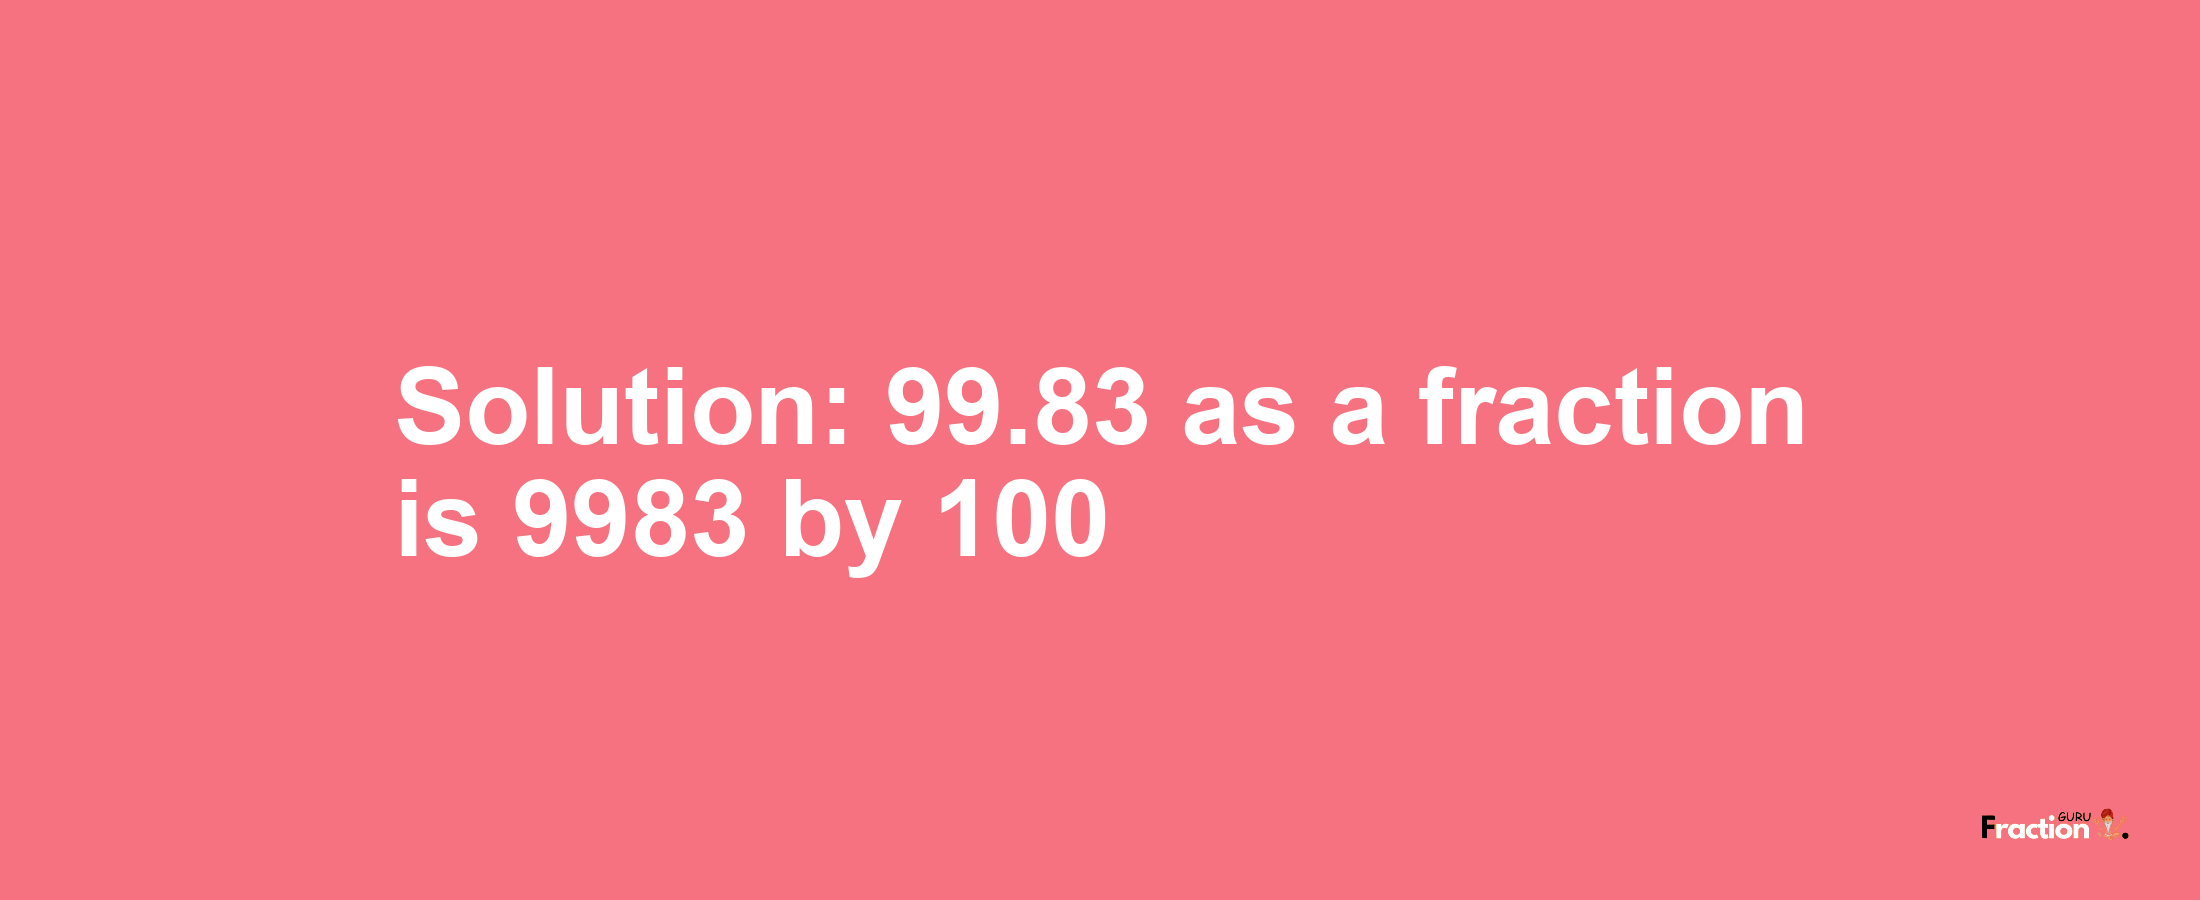 Solution:99.83 as a fraction is 9983/100